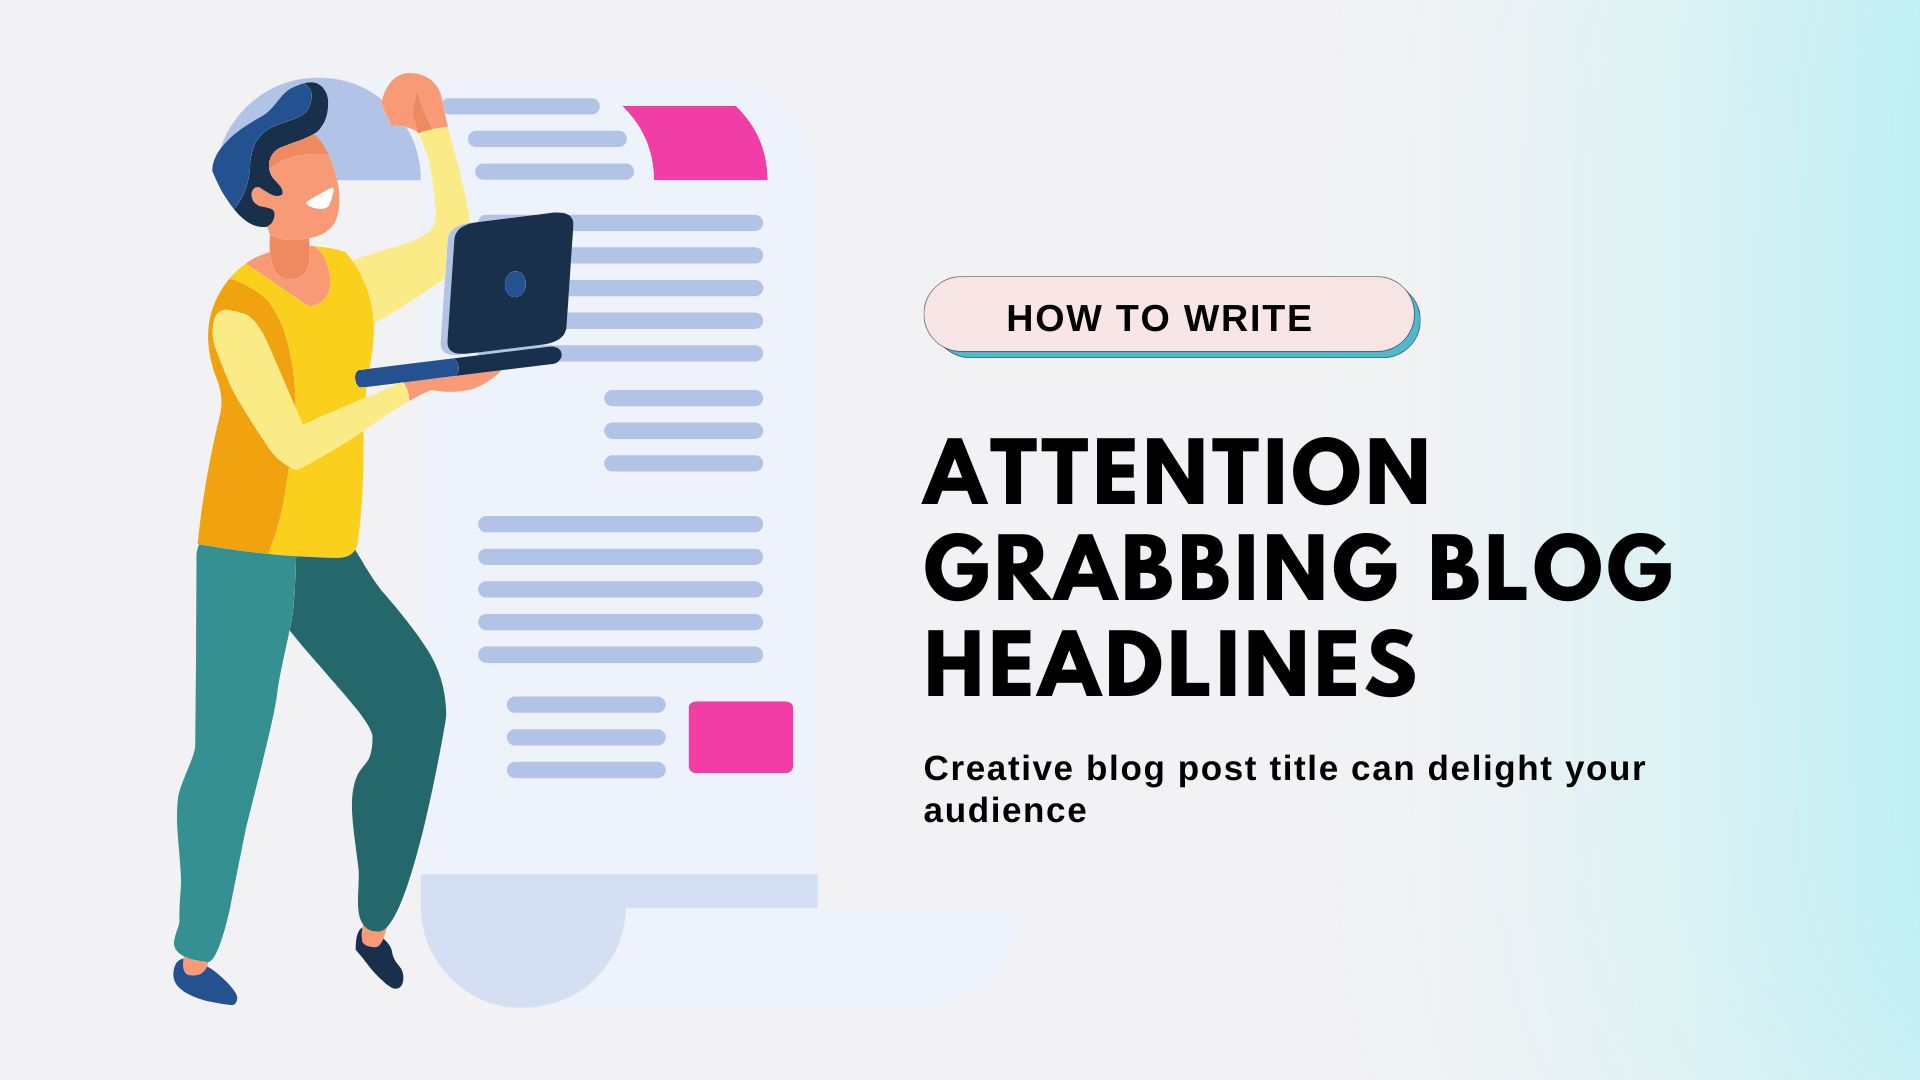 How to Write Attention Grabbing Blog Headlines